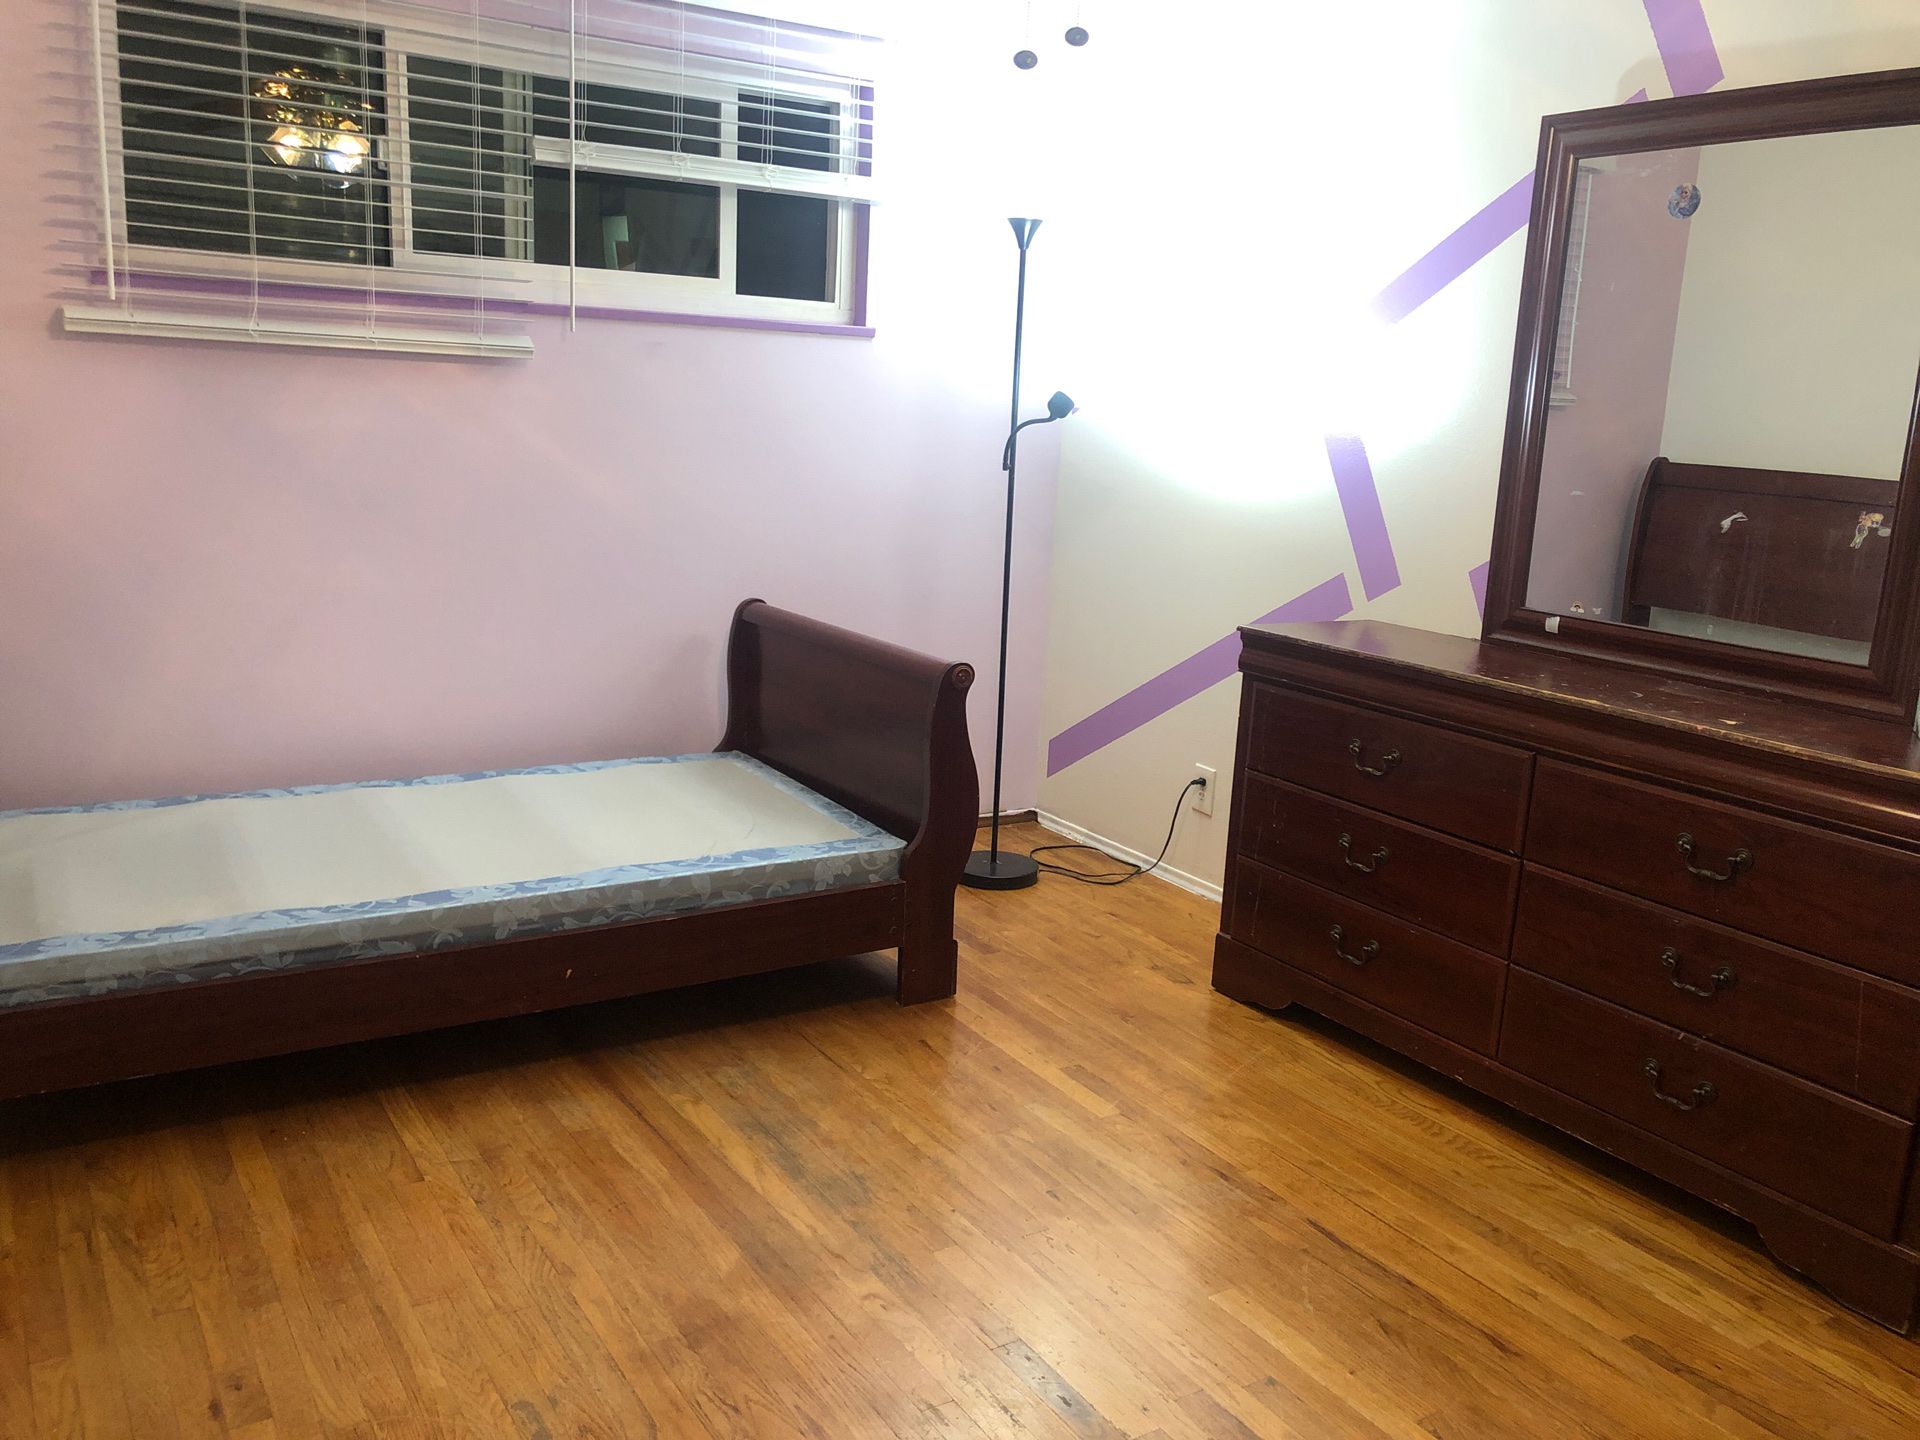 Youth bedroom set with bed frame, box mattress, and vanity with mirror